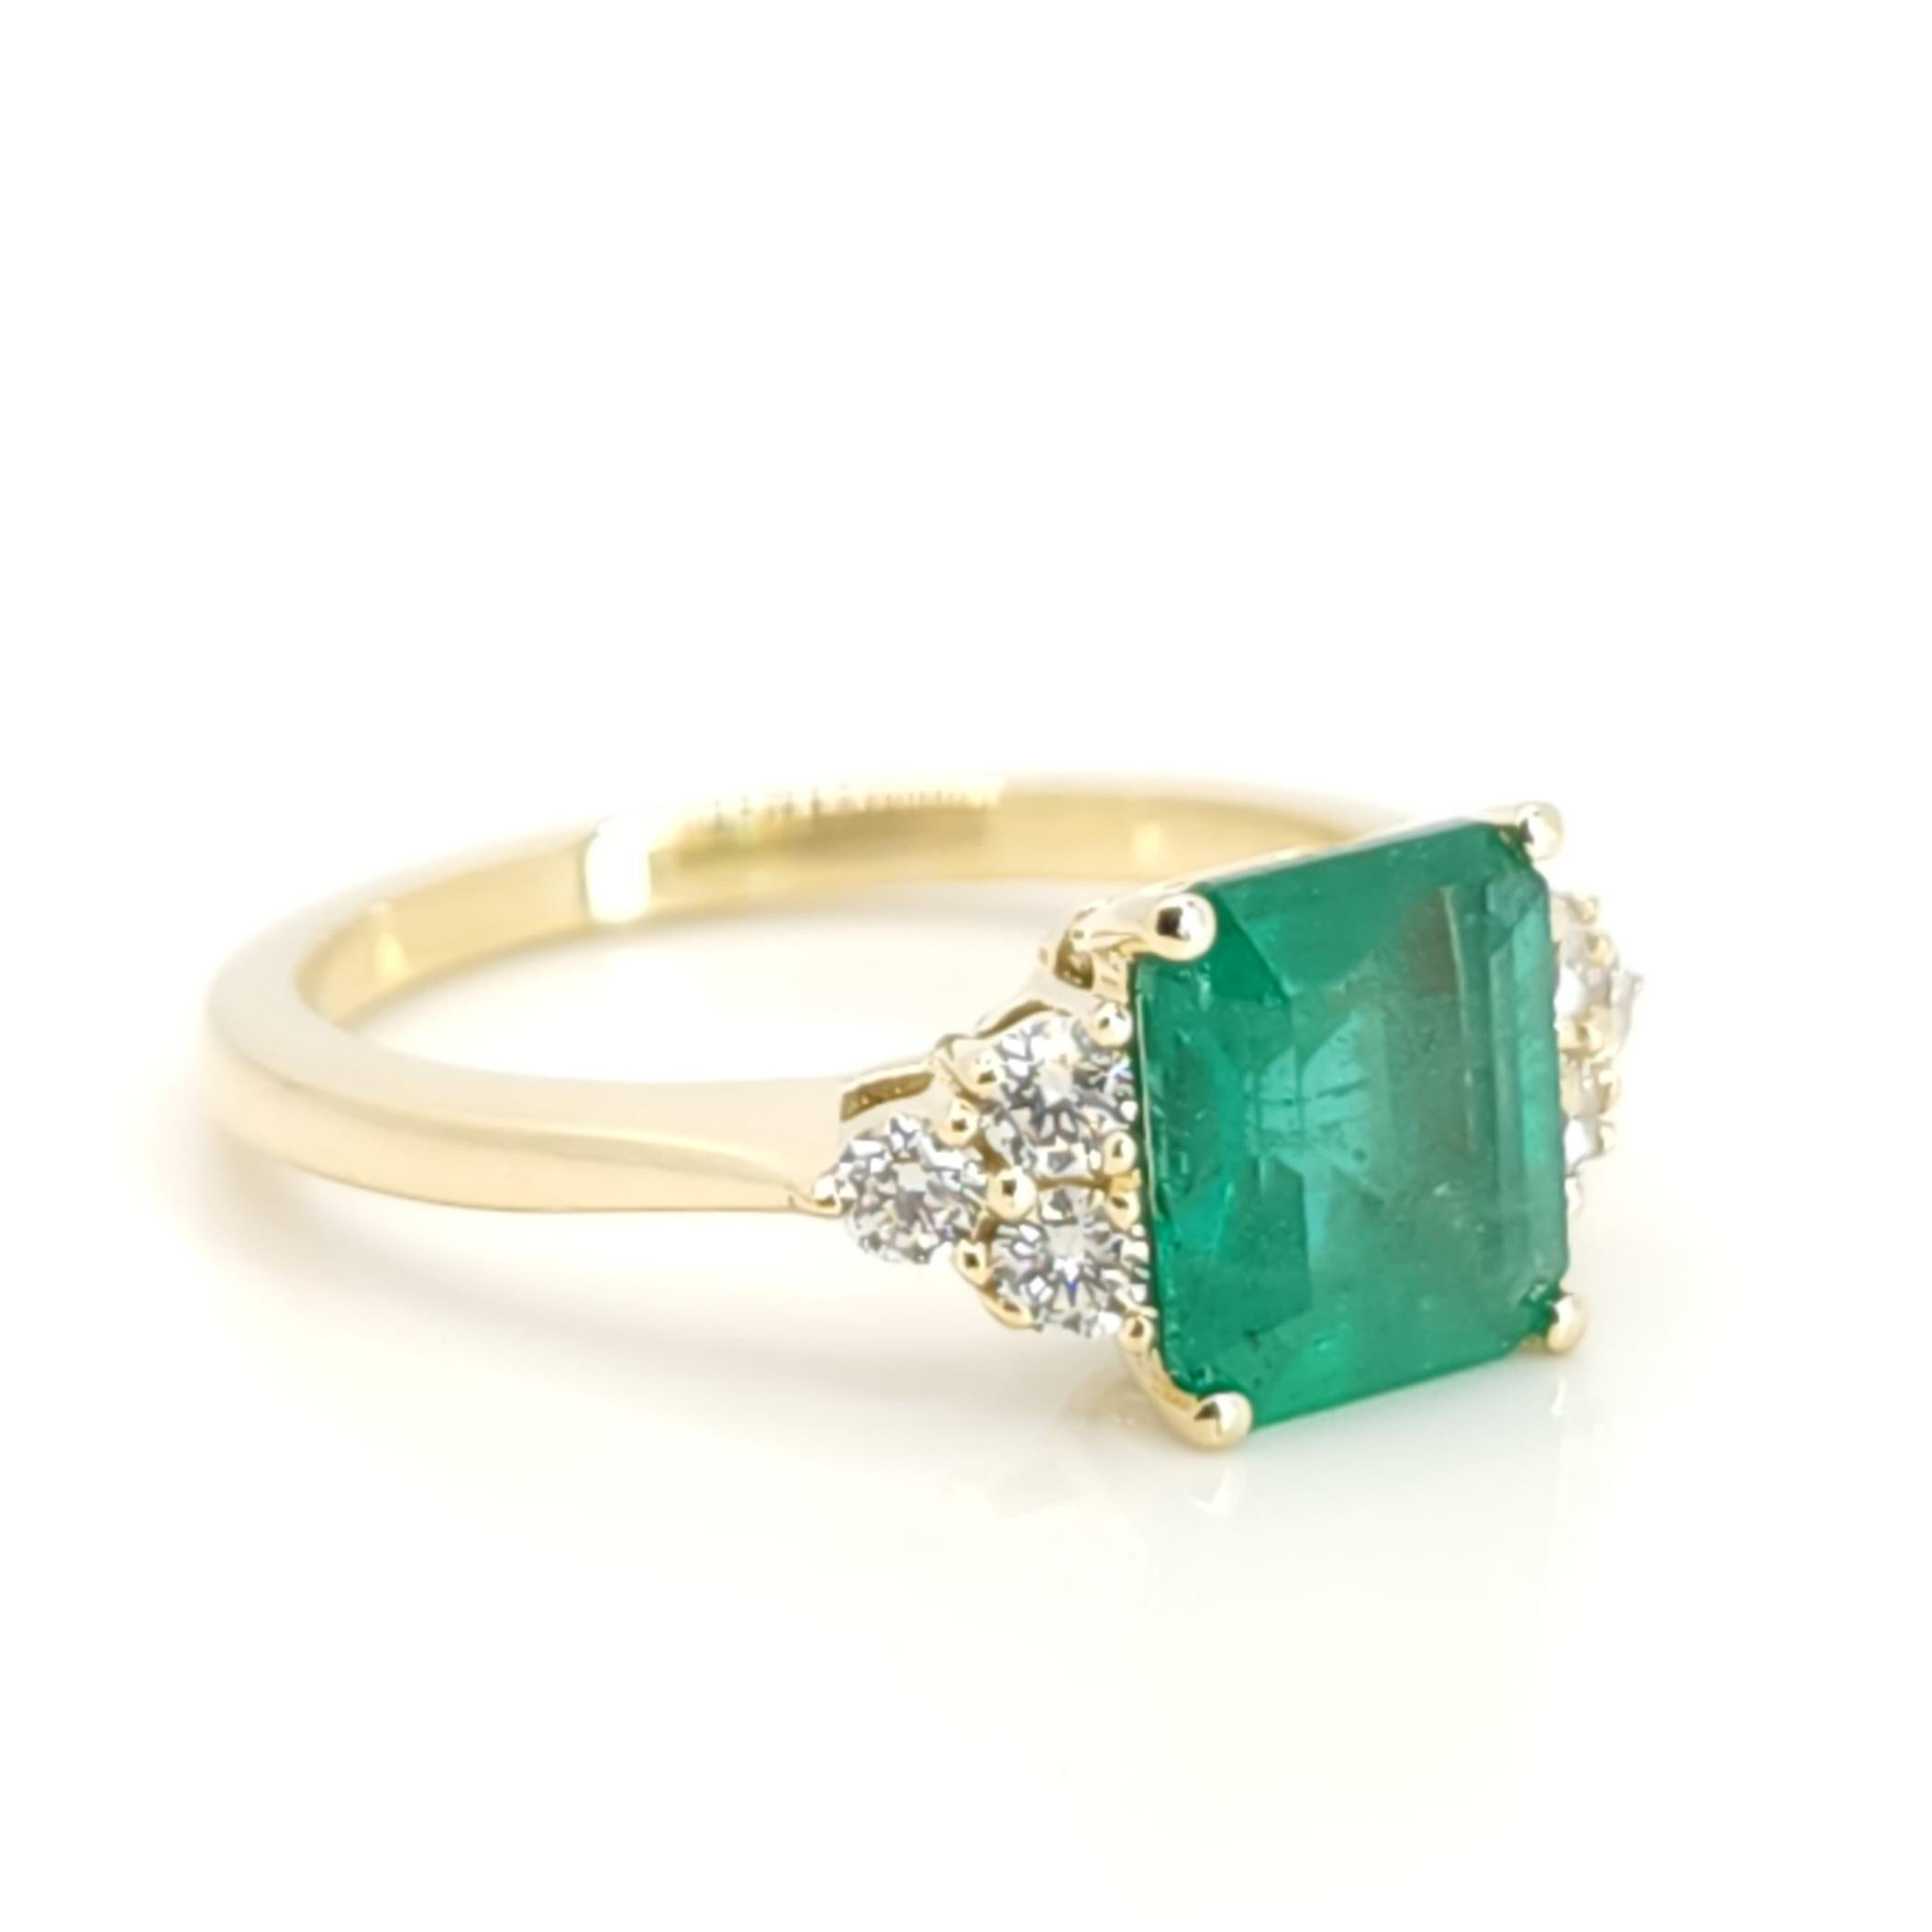 Exquisite Radiant Emerald Ring in 14K Gold

Product Description:

Introducing our Radiant Emerald wedding Ring, a treasure among treasures. This radiant emerald ring, set in 14K gold, is a celebration of timeless beauty and elegance. It's more than